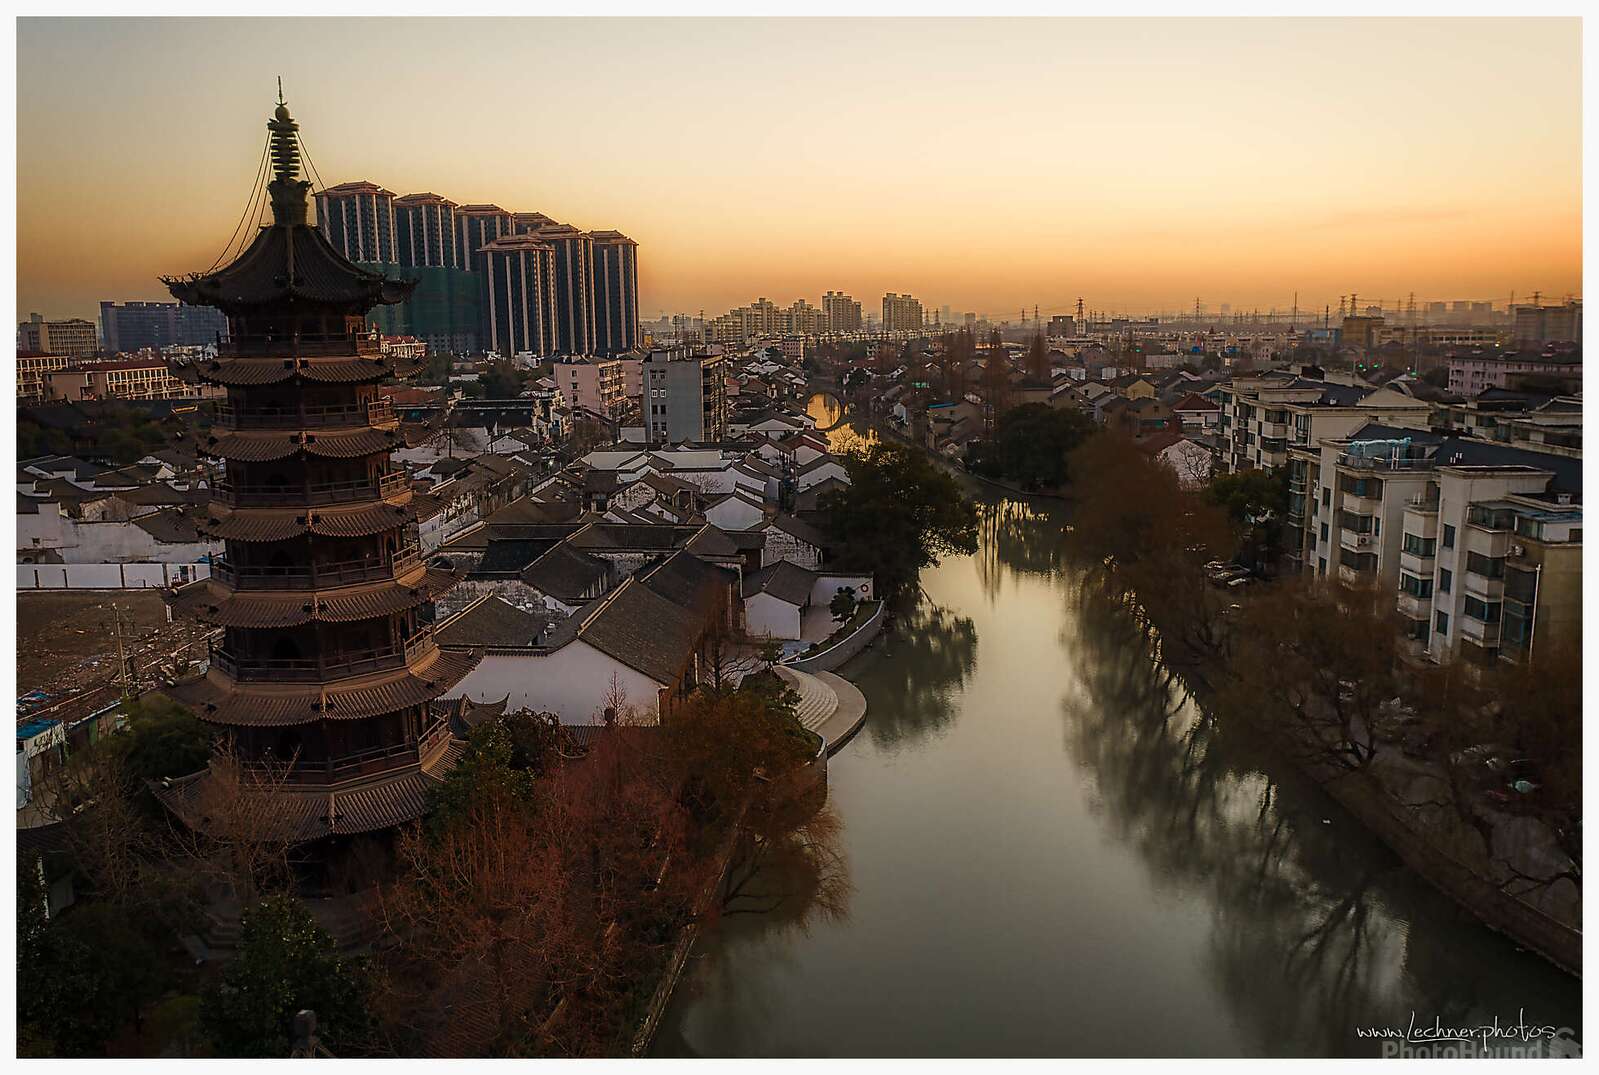 Image of Sijing Old Town by Florian Lechner